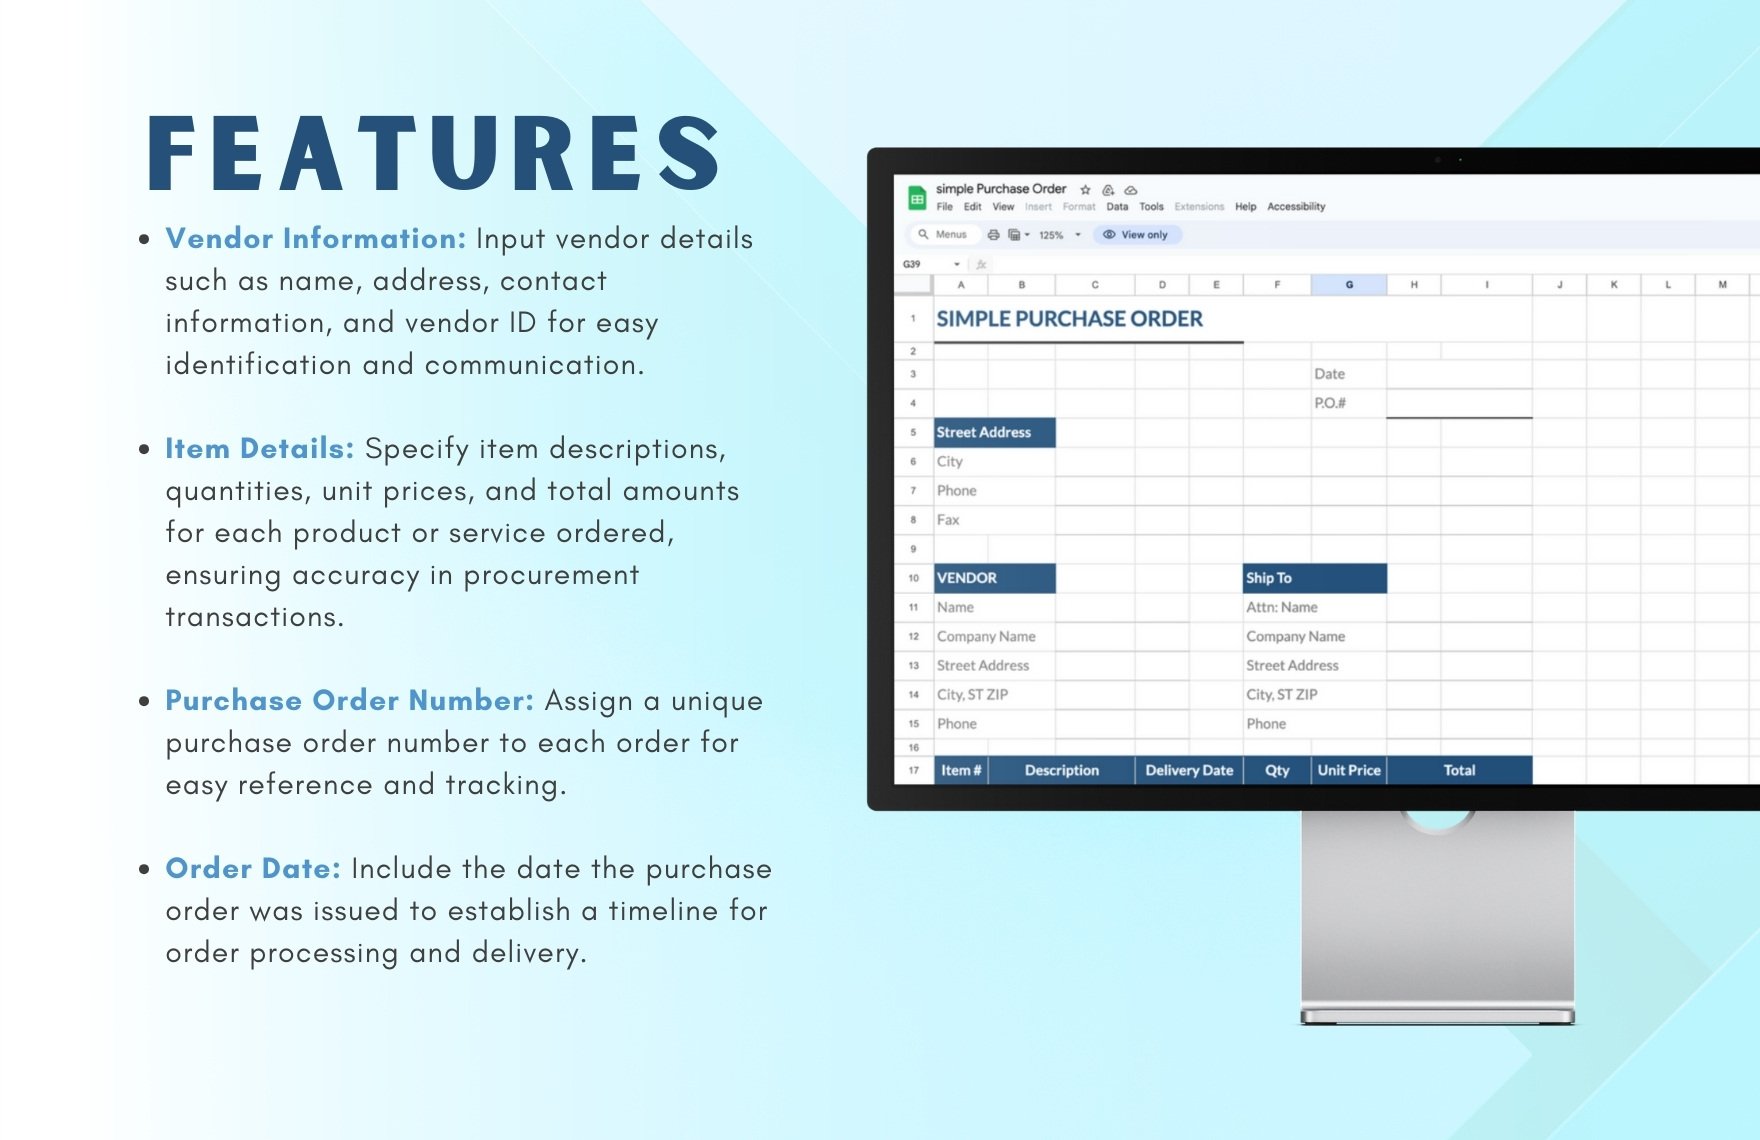 Simple Purchase Order Template